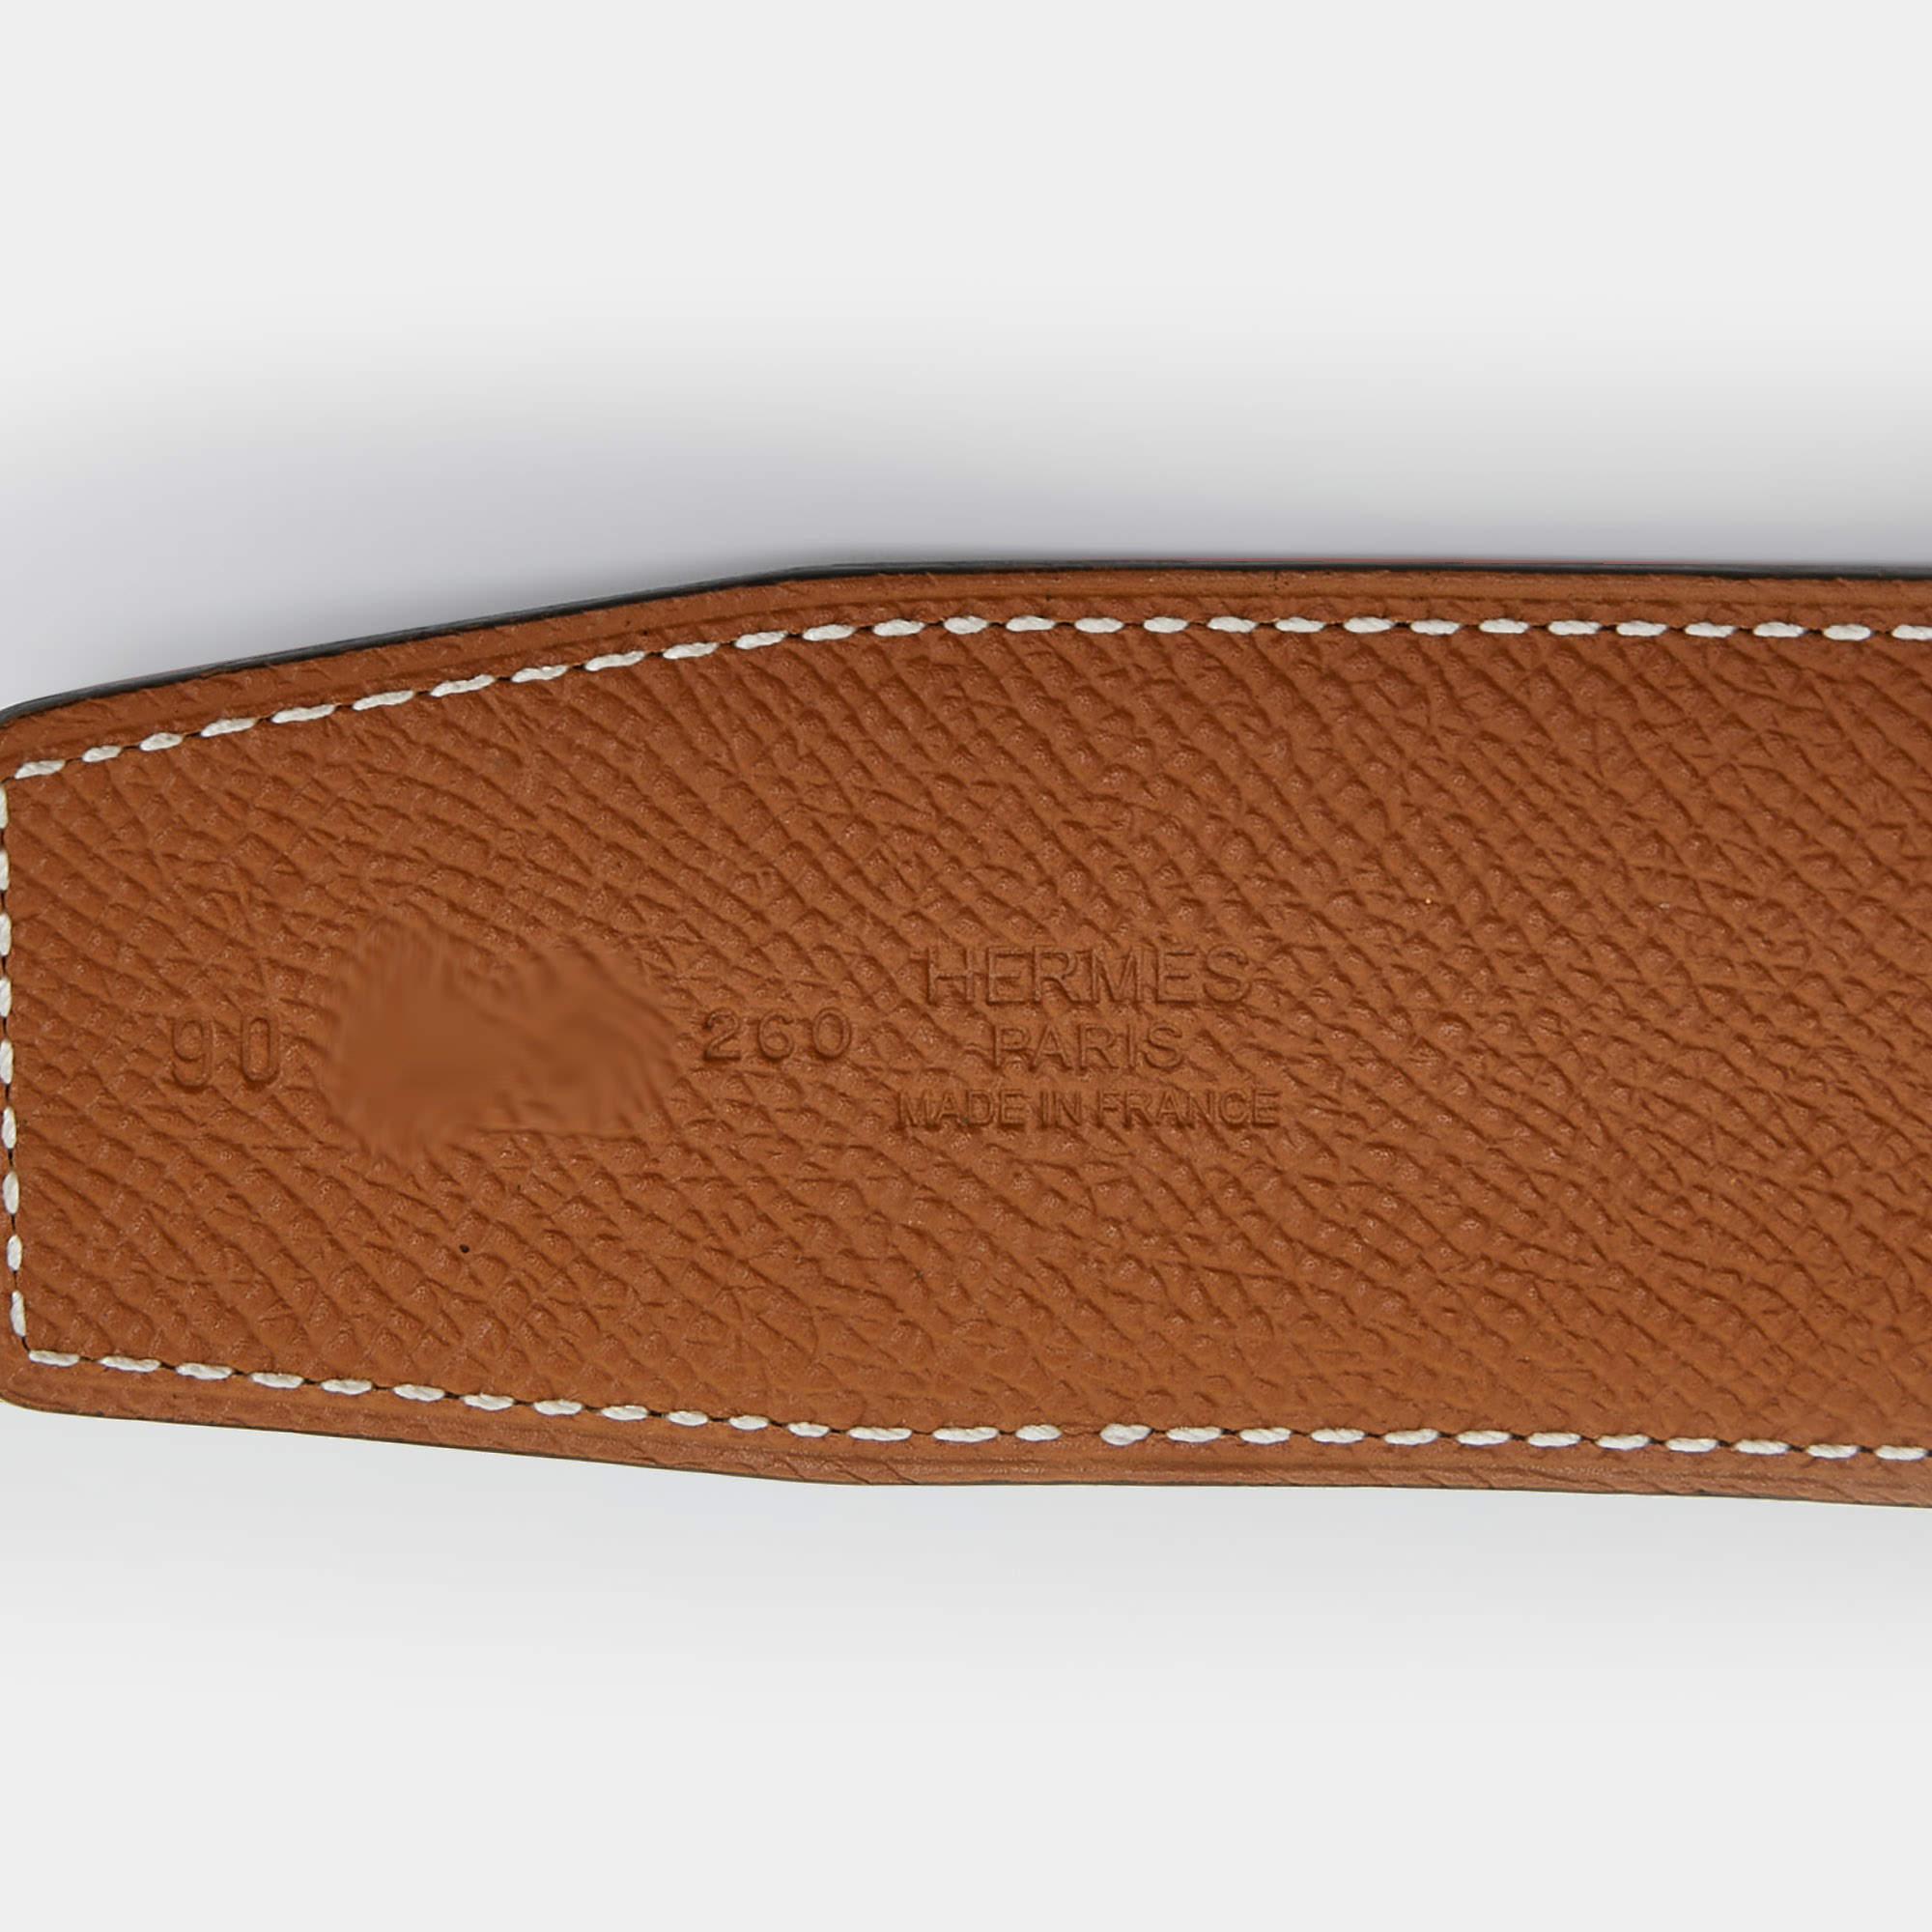 The classic and one of the iconic styles from the house of Hermes is their belts which give this luxurious piece a multi-utility and versatile look. Crafted from leather, this belt strap features tonal stitching around the edges along with